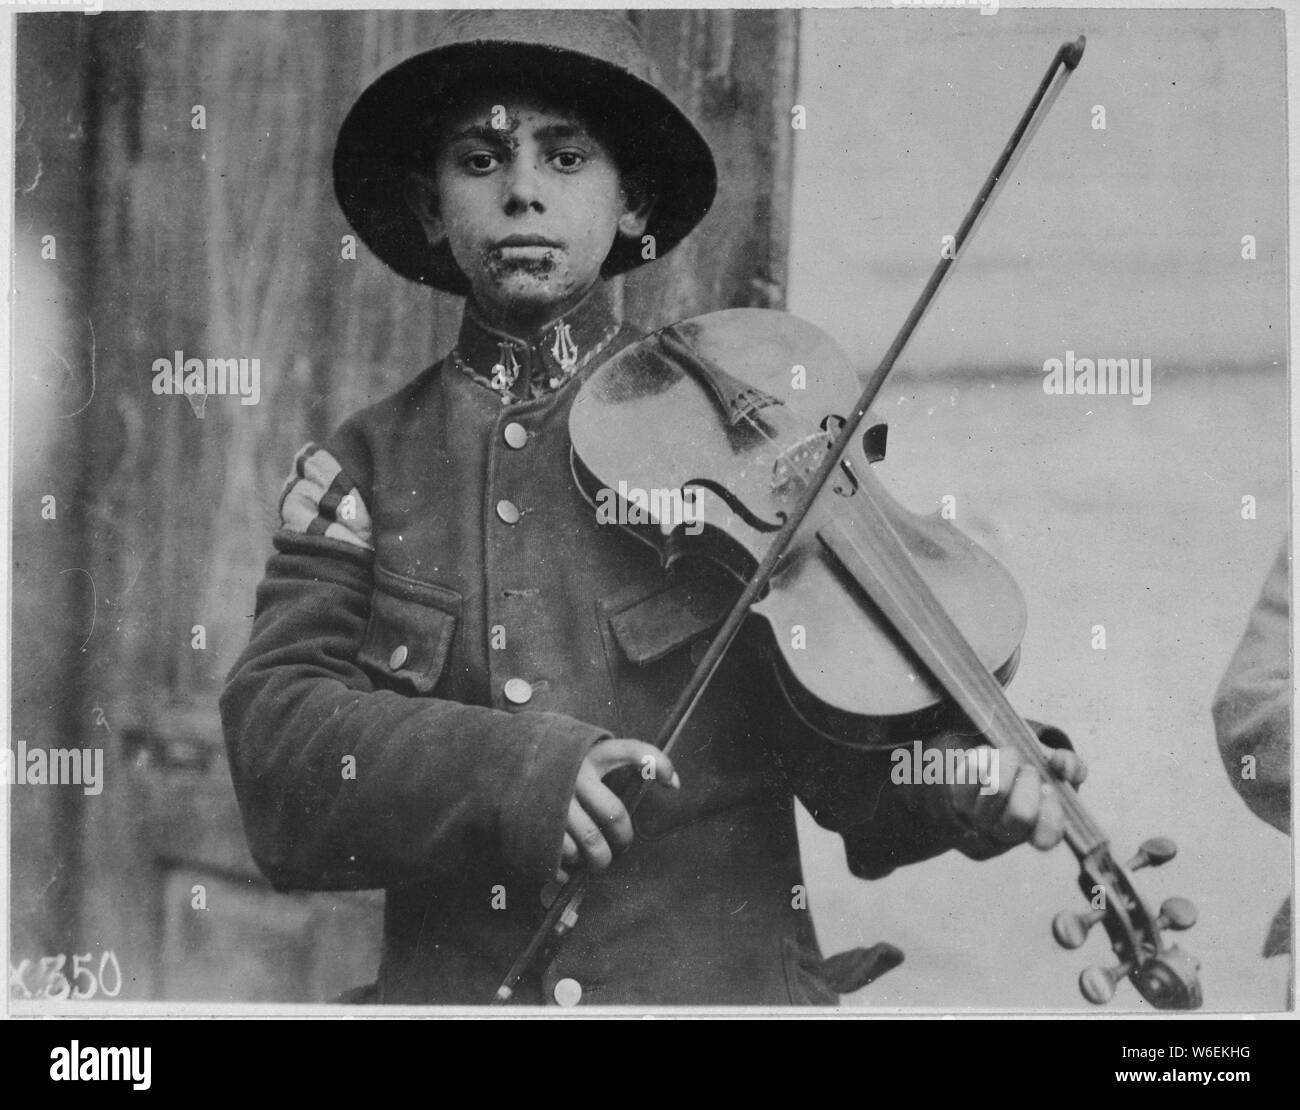 English: A Christmas street fiddler, Belgrade. Serbia [Yugoslavia], December 1918. American Red Cross, 1917–19; General notes:  Use War and Conflict Number 676 when ordering a reproduction or requesting information about this image. Stock Photo